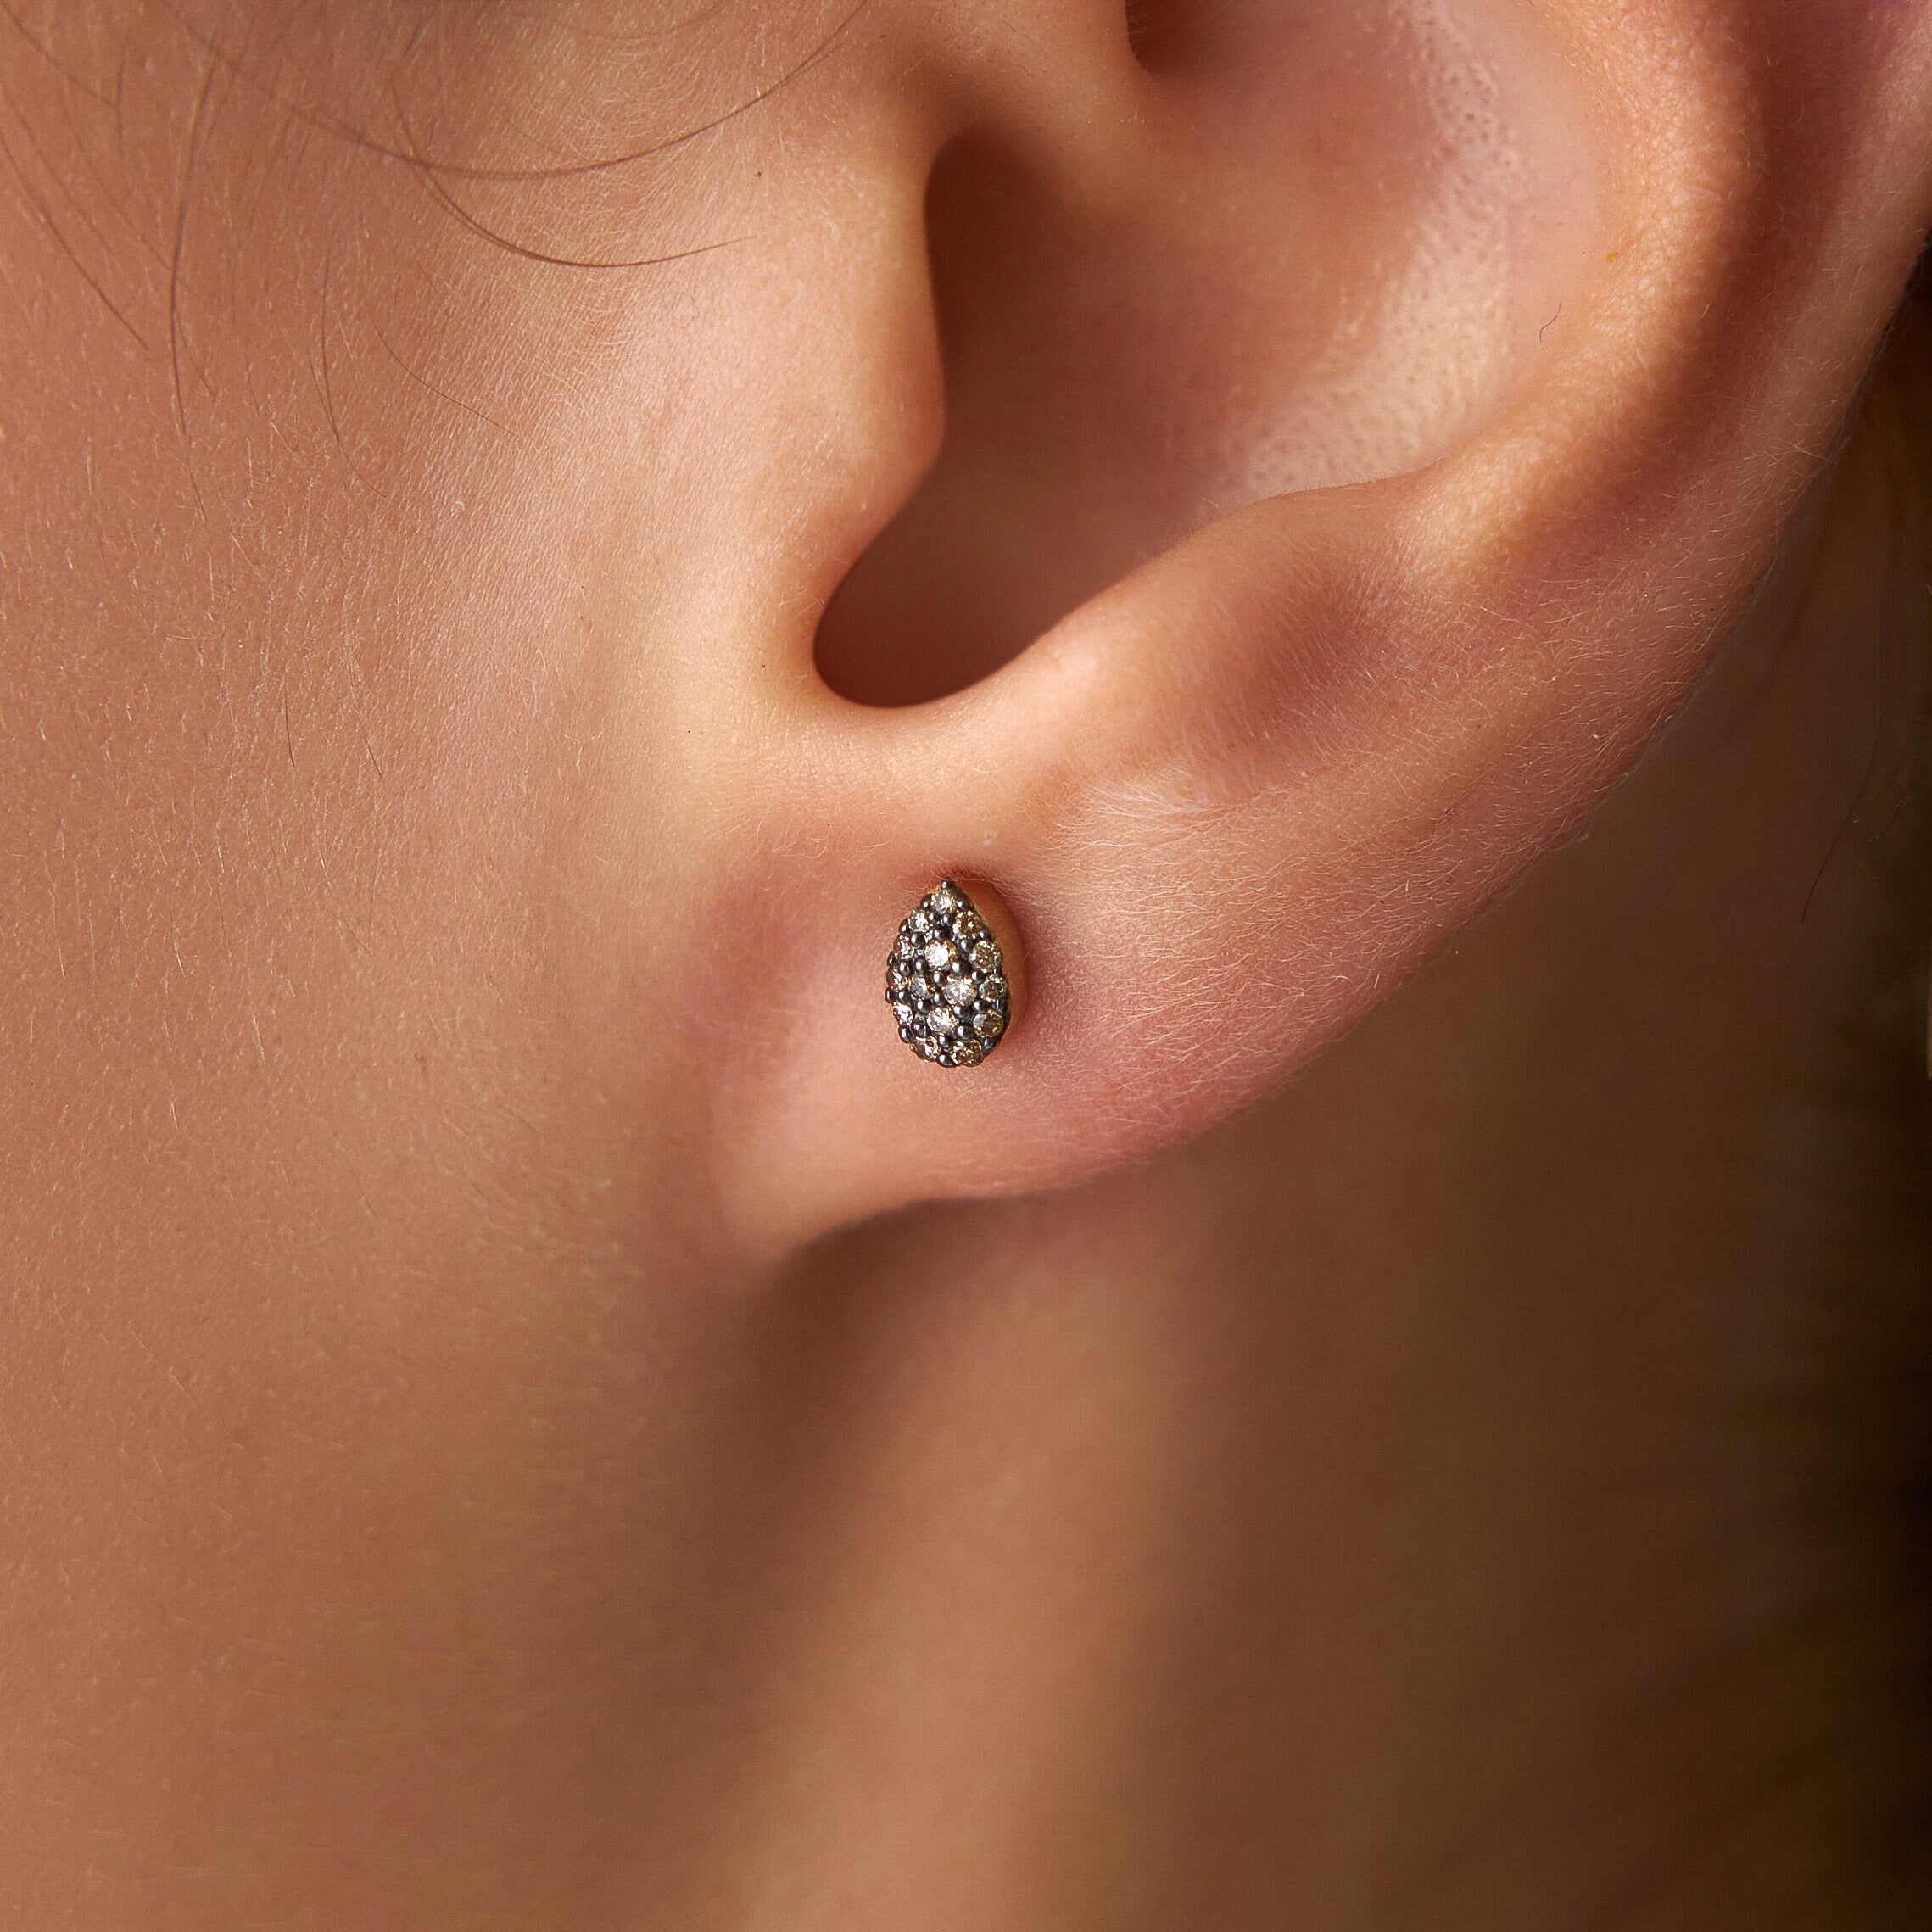 Chocolate Diamond Earrings Available in 14K and 18K Gold